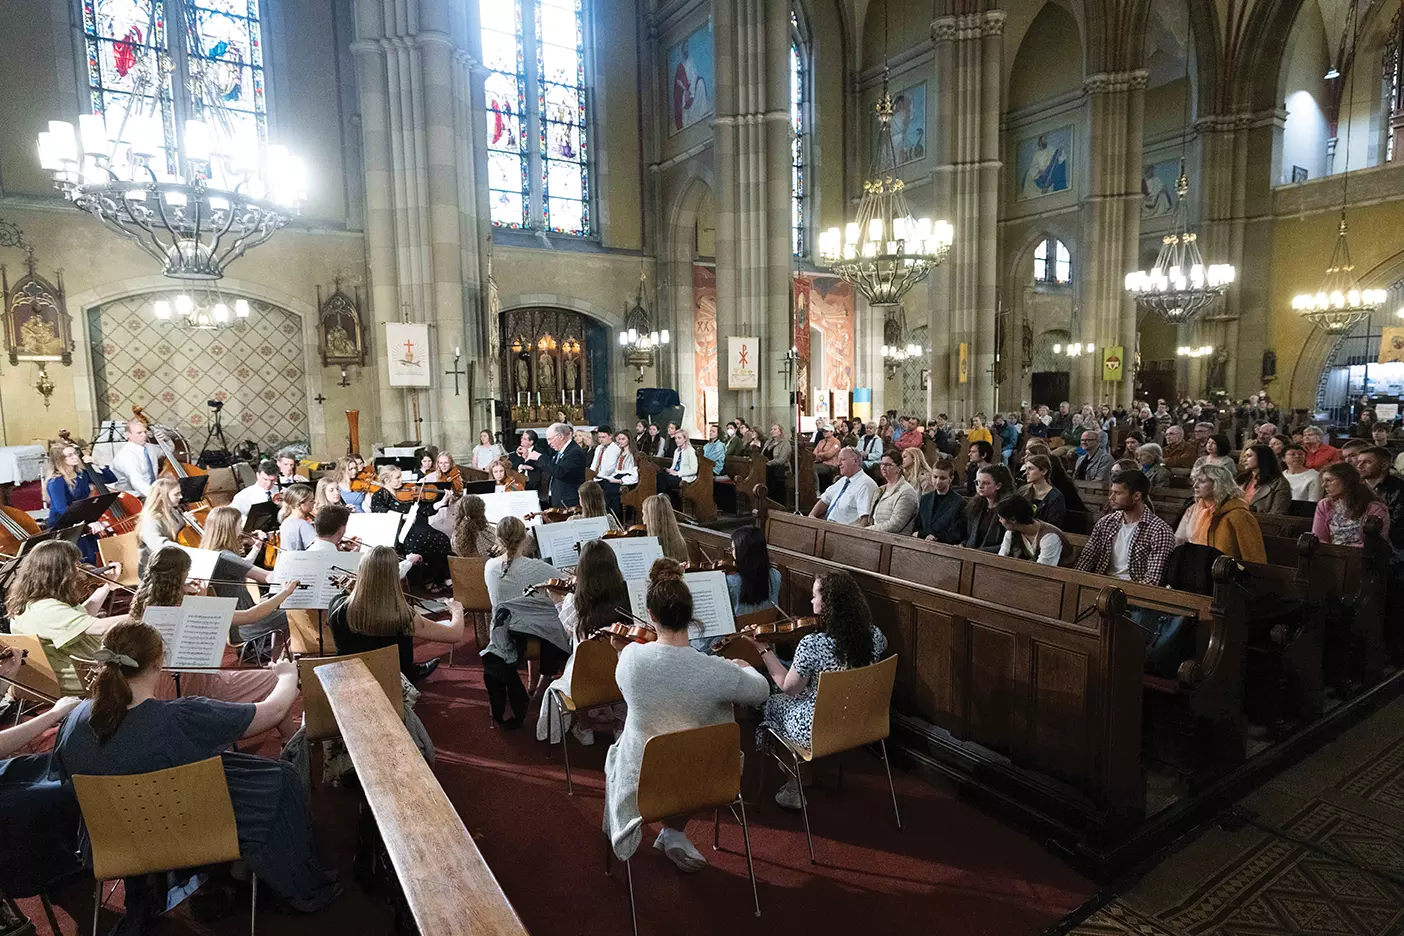 BYU Orchestra performs in a Catholic Church in Vienna.